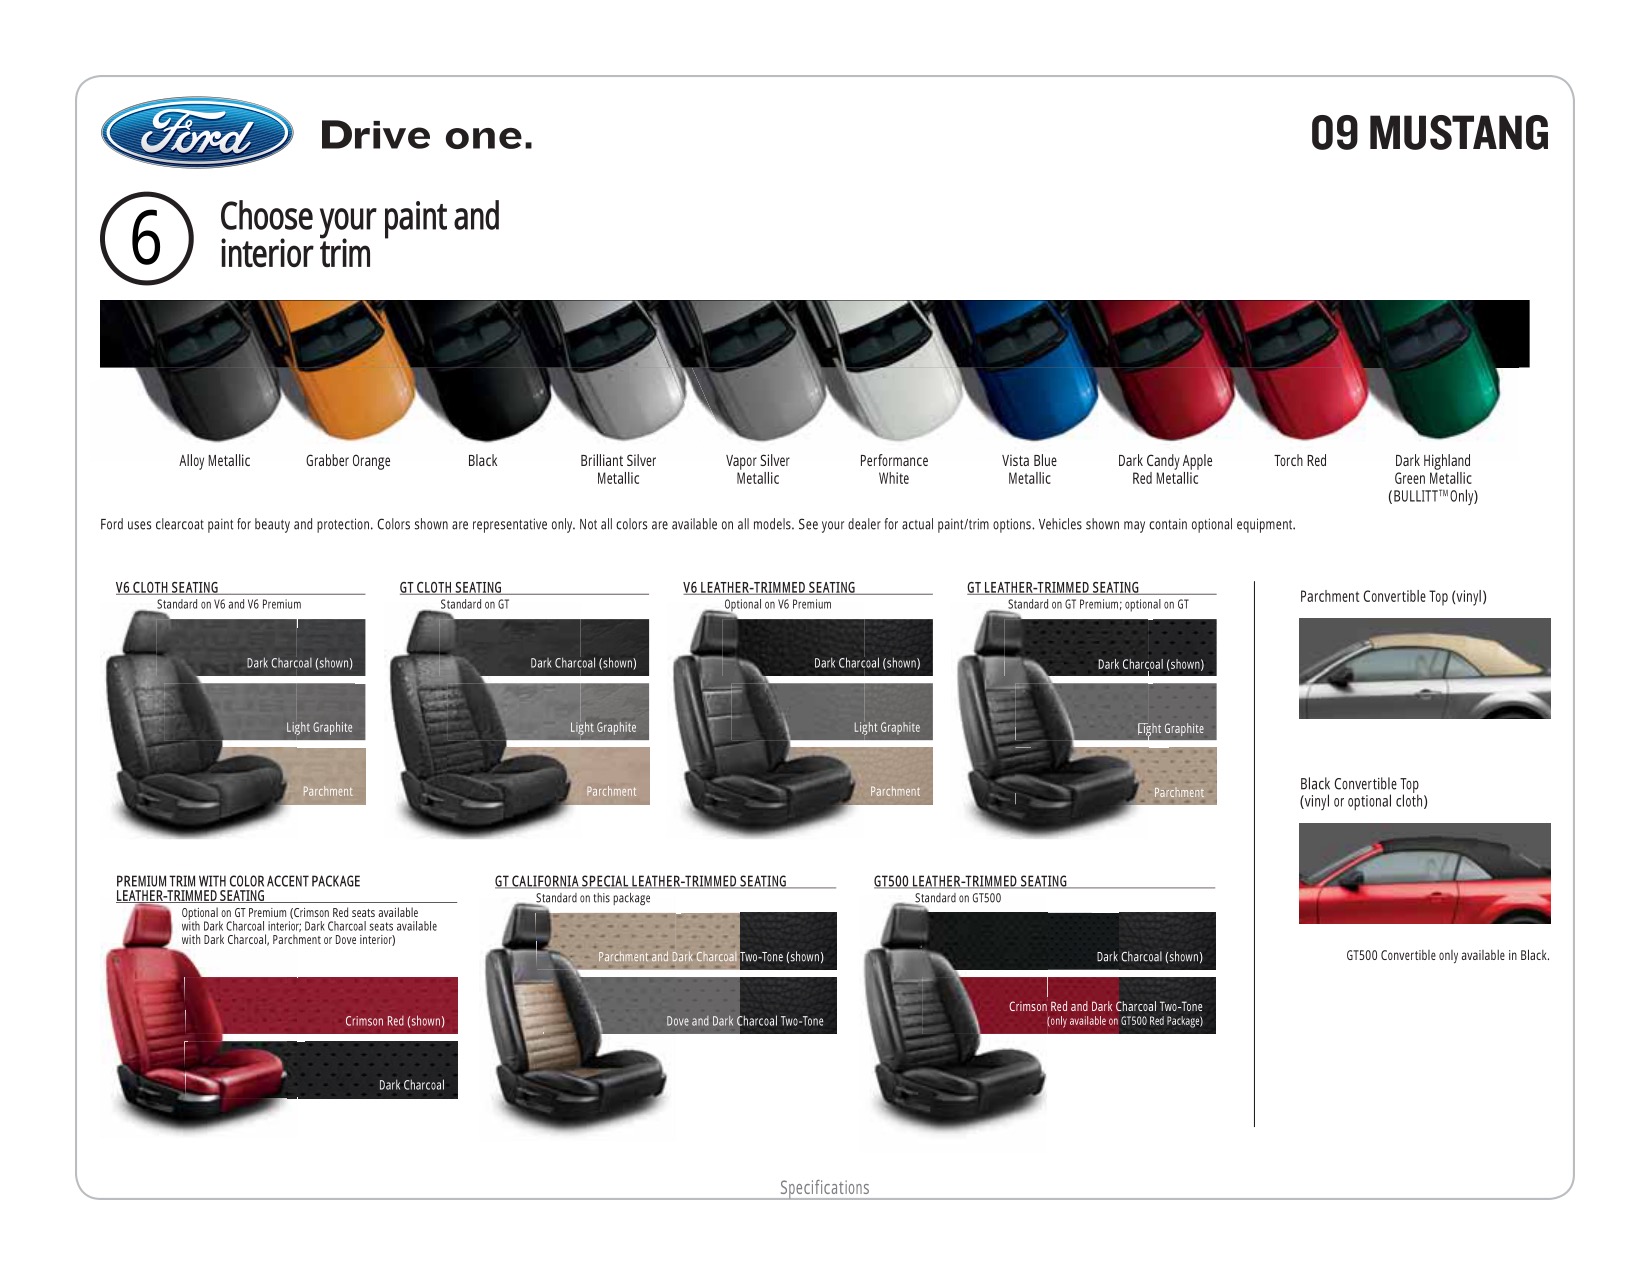 2009 Ford Mustang Brochure Page 6